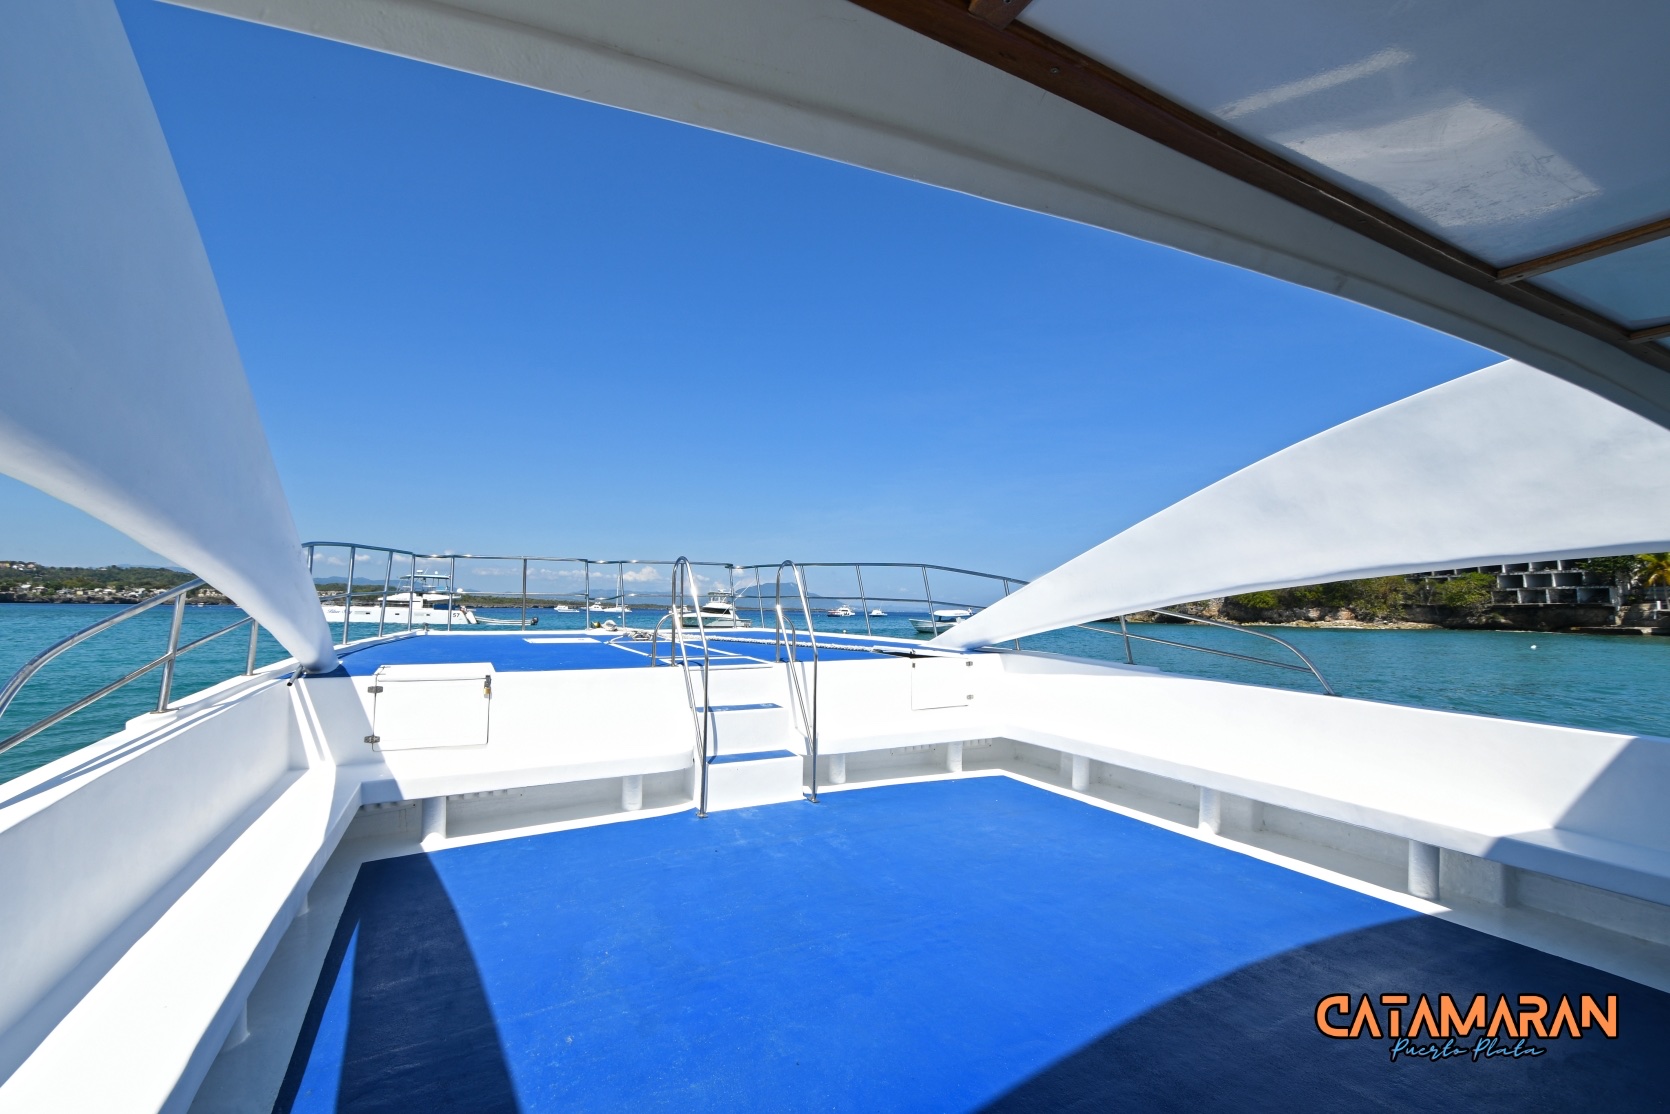 Large deck of the catamaran, fit for dance parties